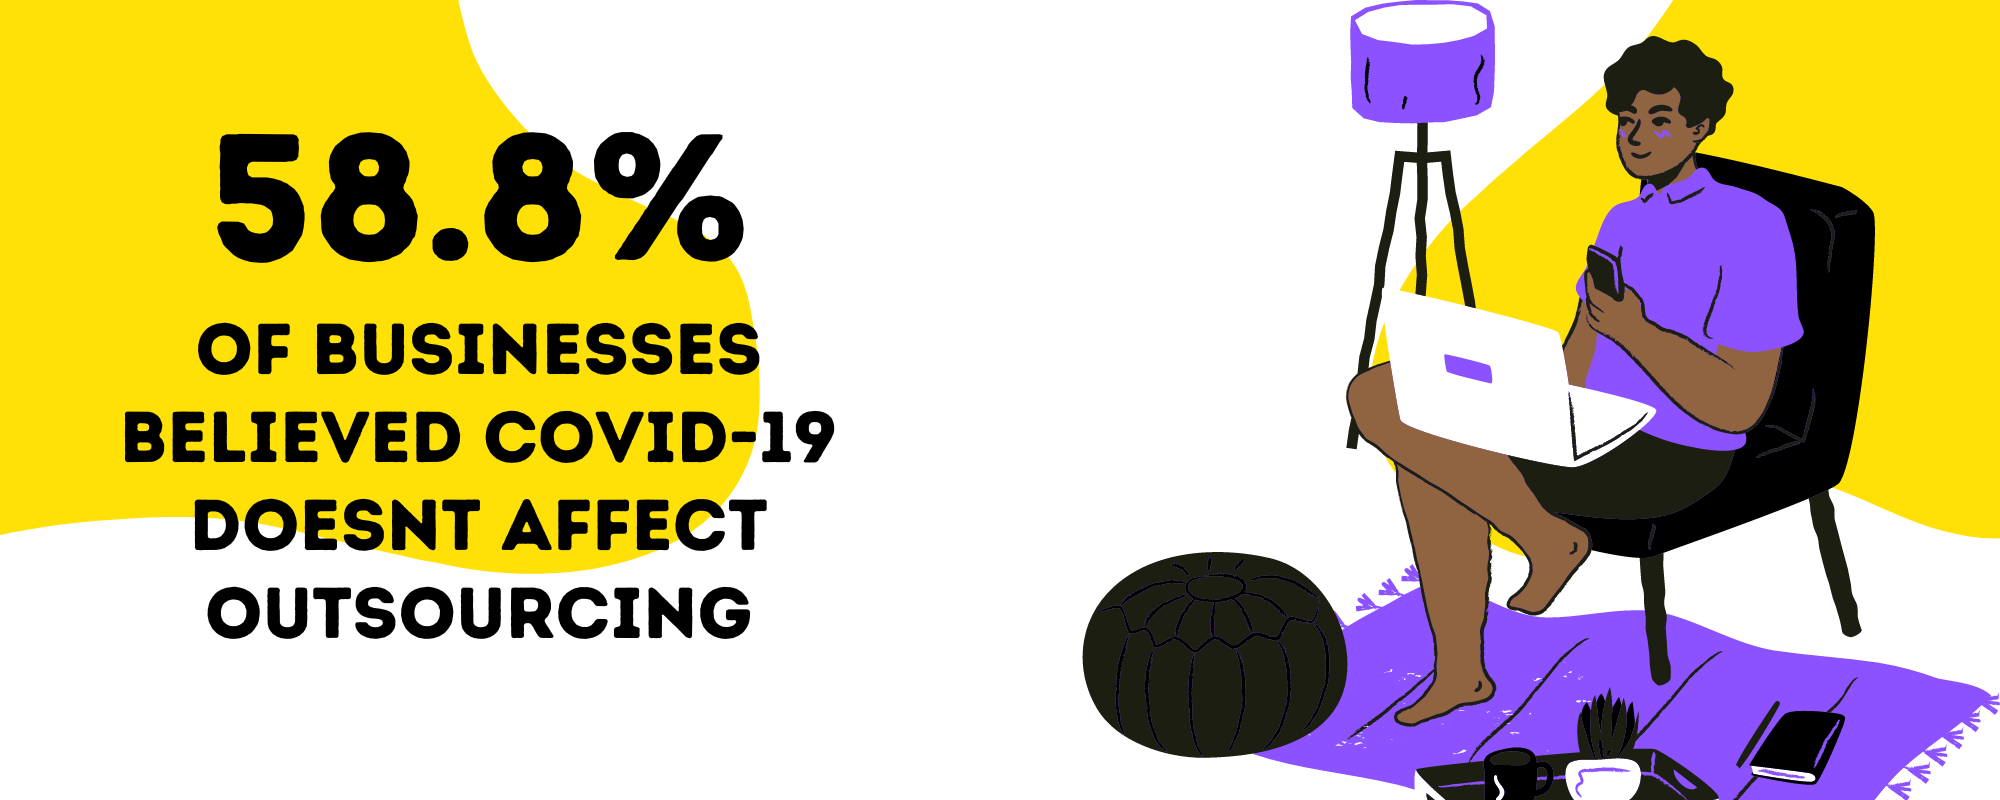 58.8% of businesses believed Covid-19 doesn't affect outsourcing